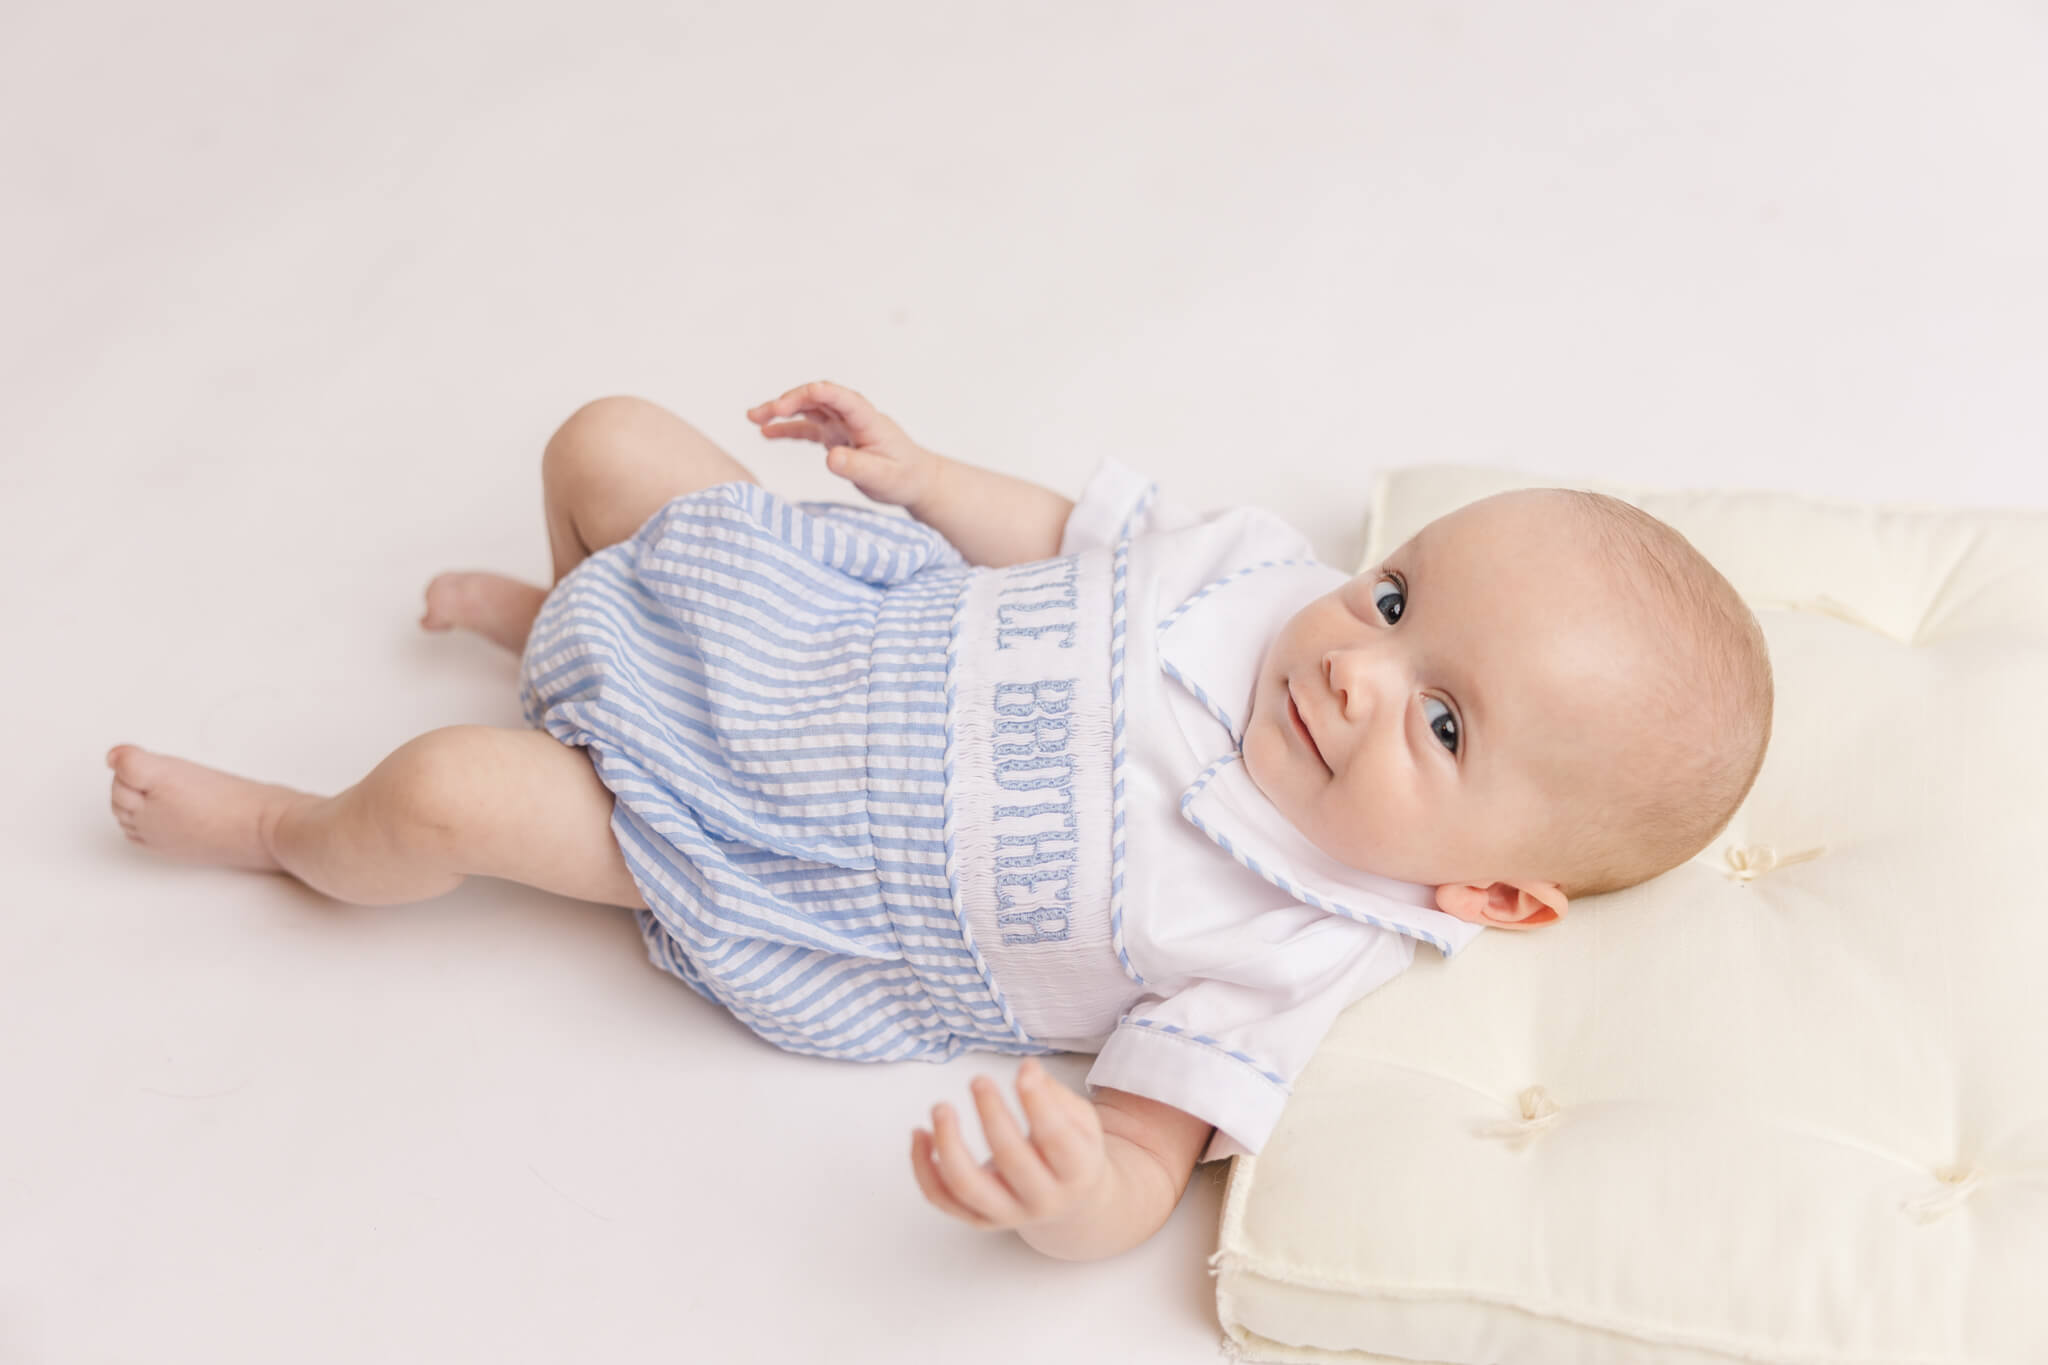 little boy in white and blue laying on a pillow smiling